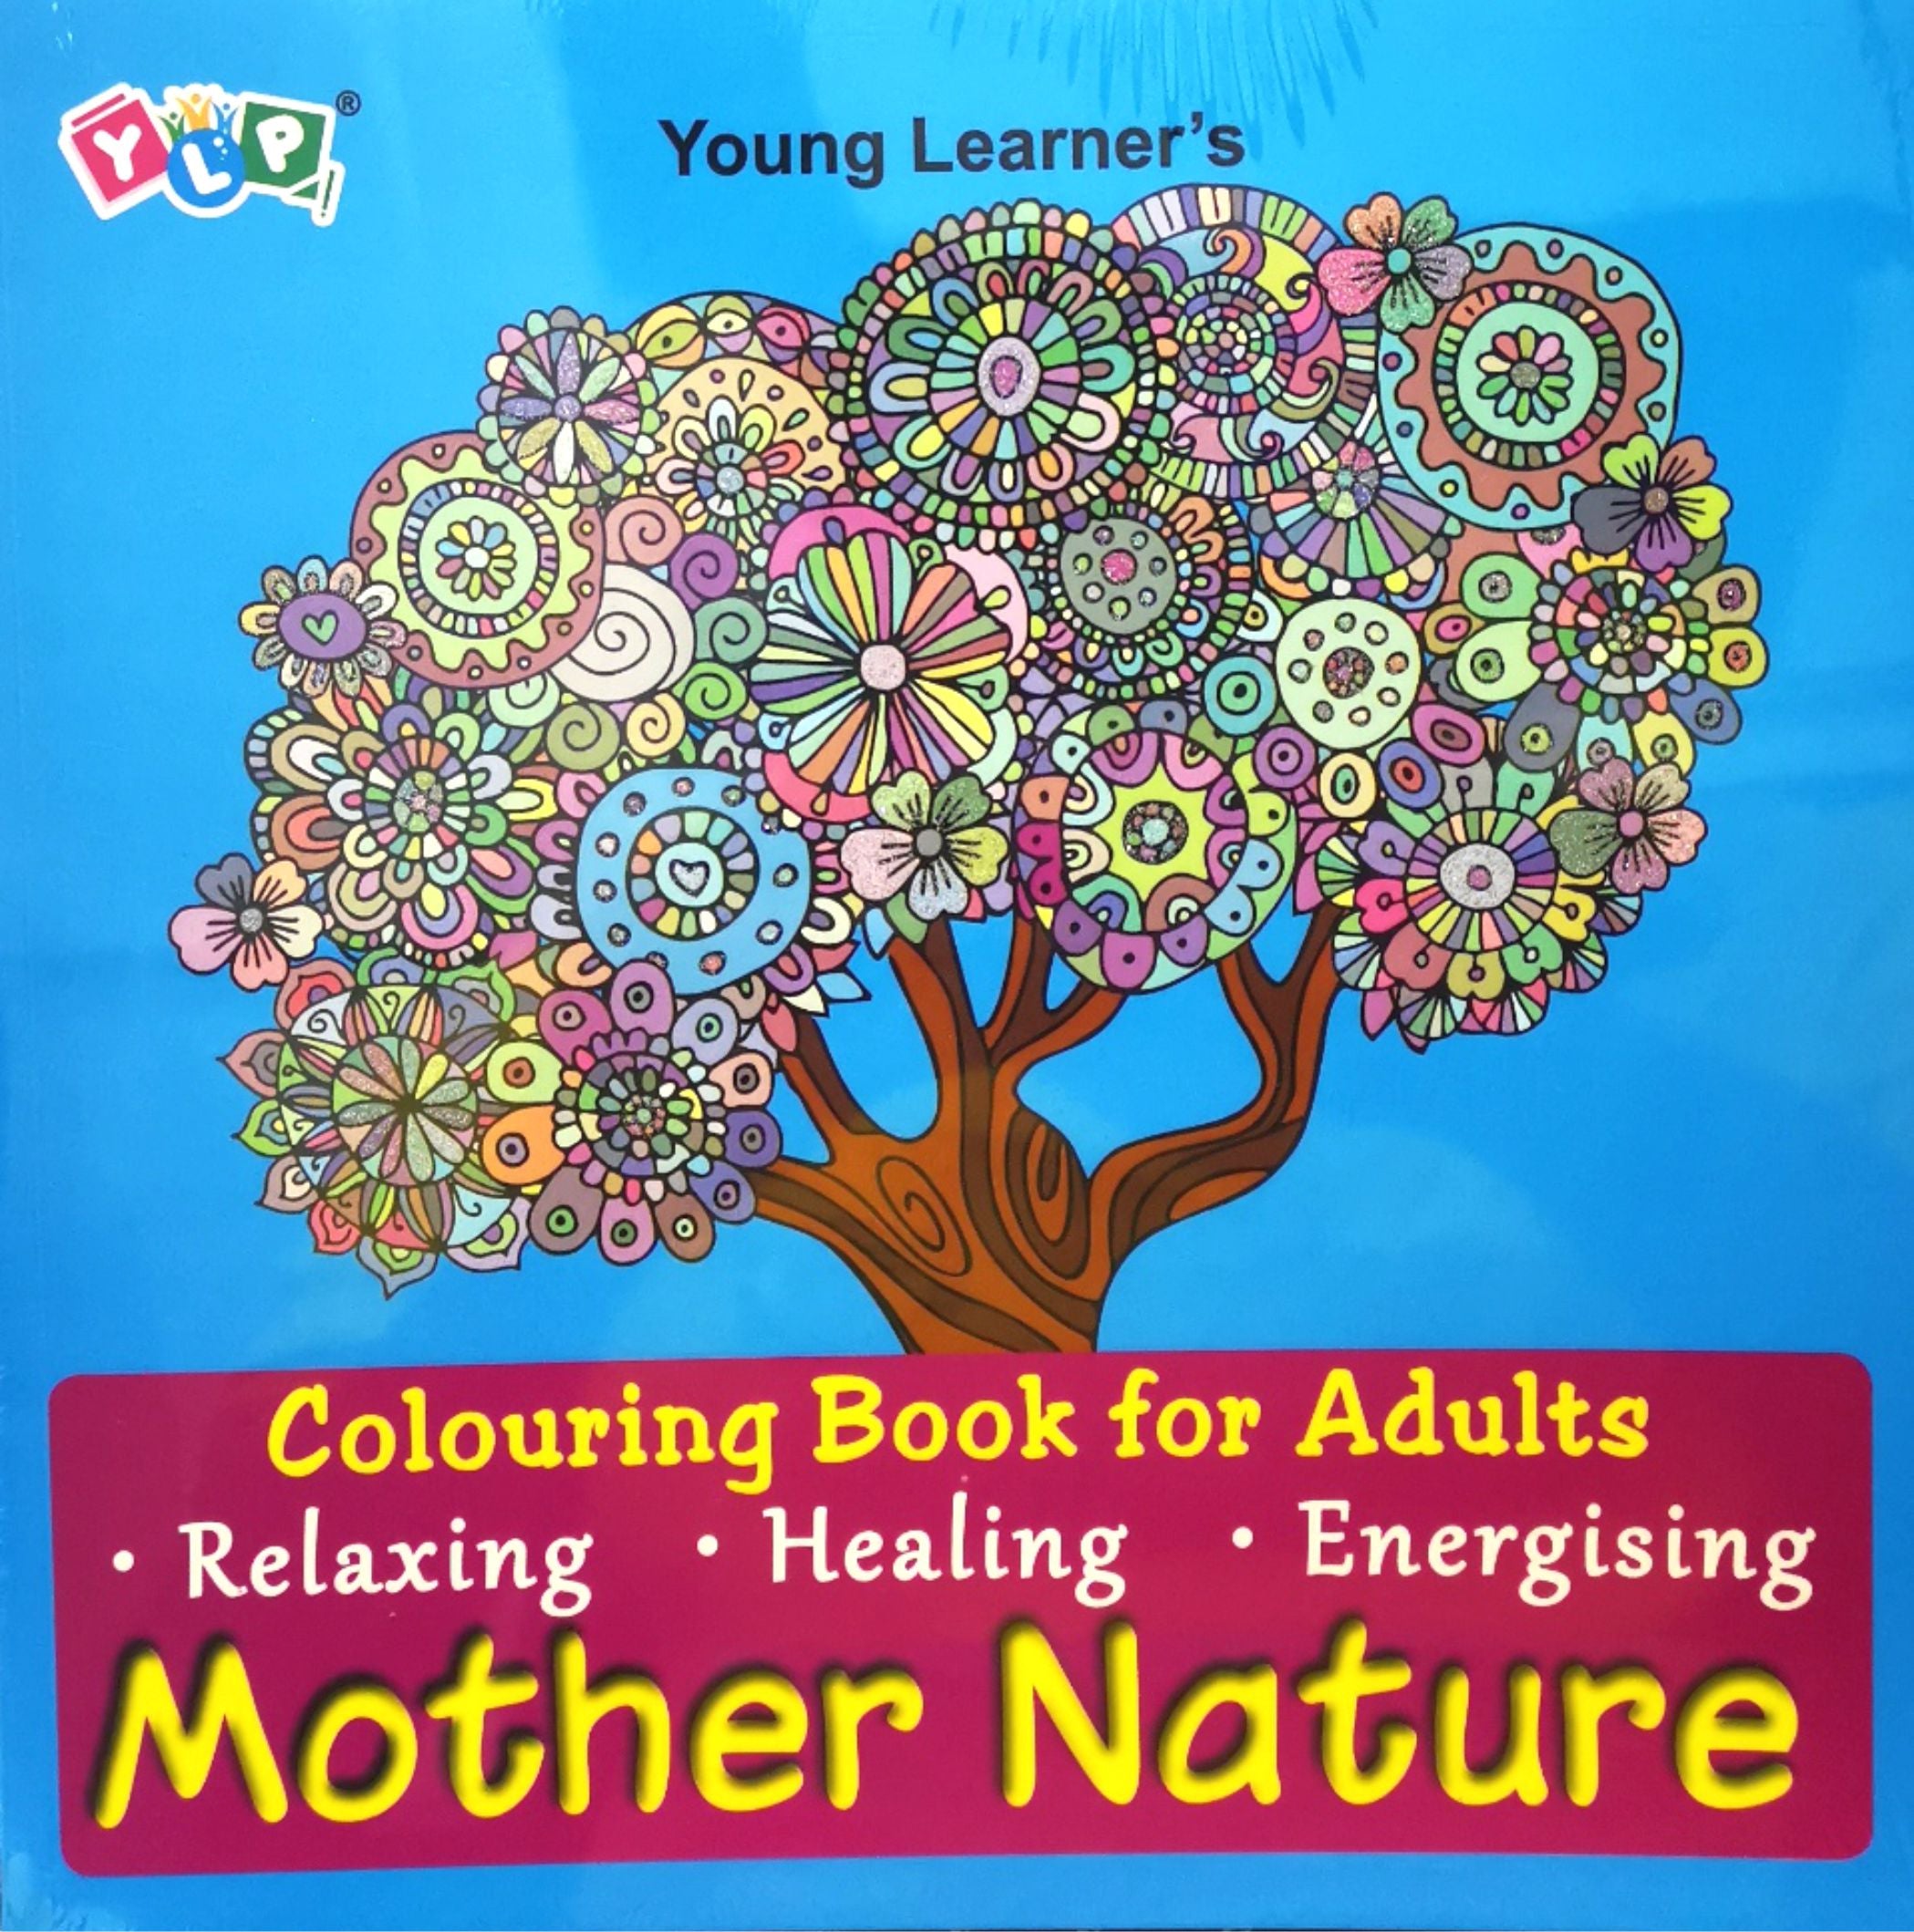 Colouring Book for Adults • Relaxing • Healing • Energising – Mother Nature